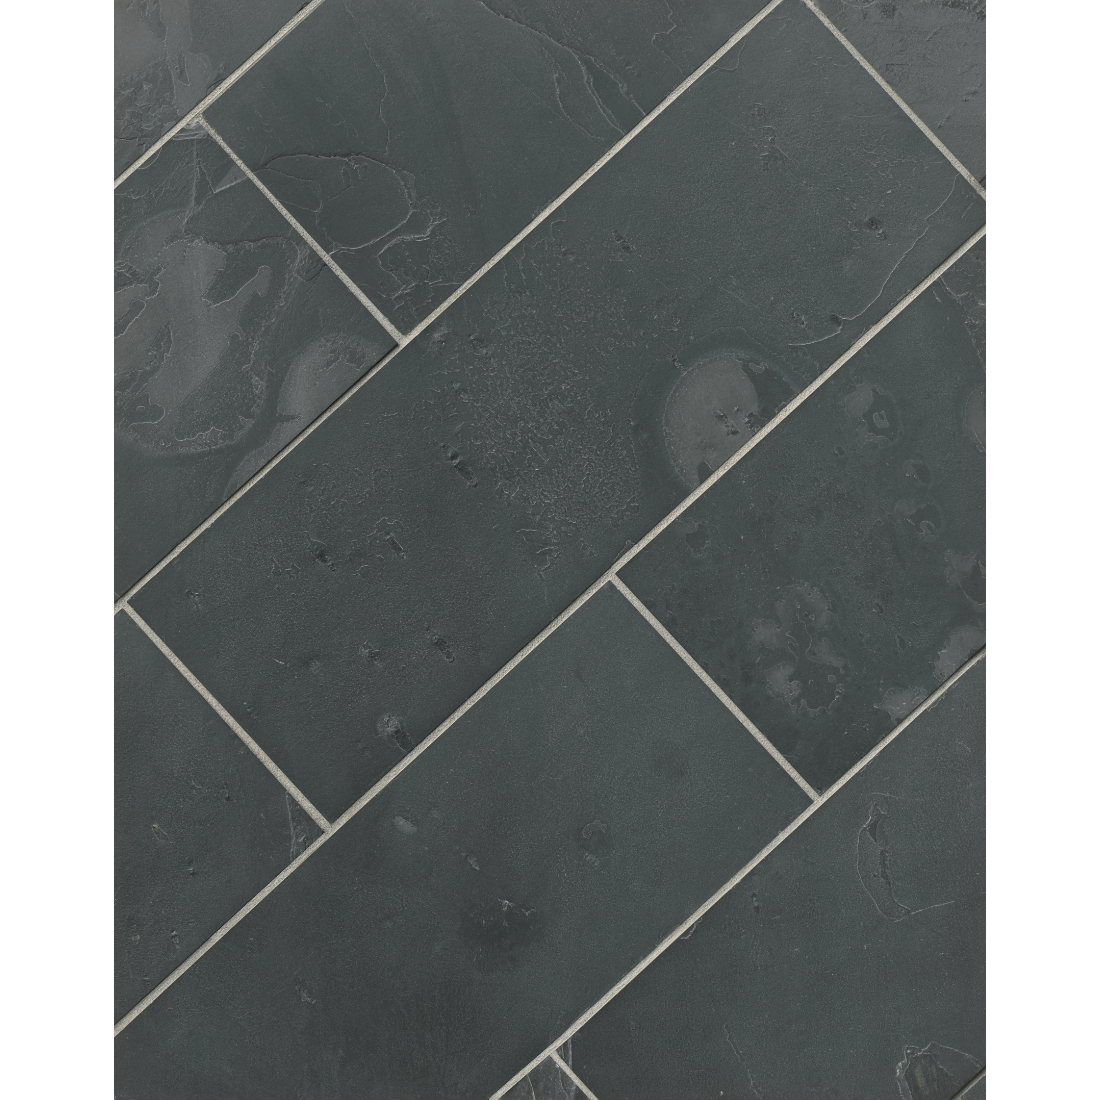 Adoni Black Slate Wall and Floor Tile - 8 x 24 in.